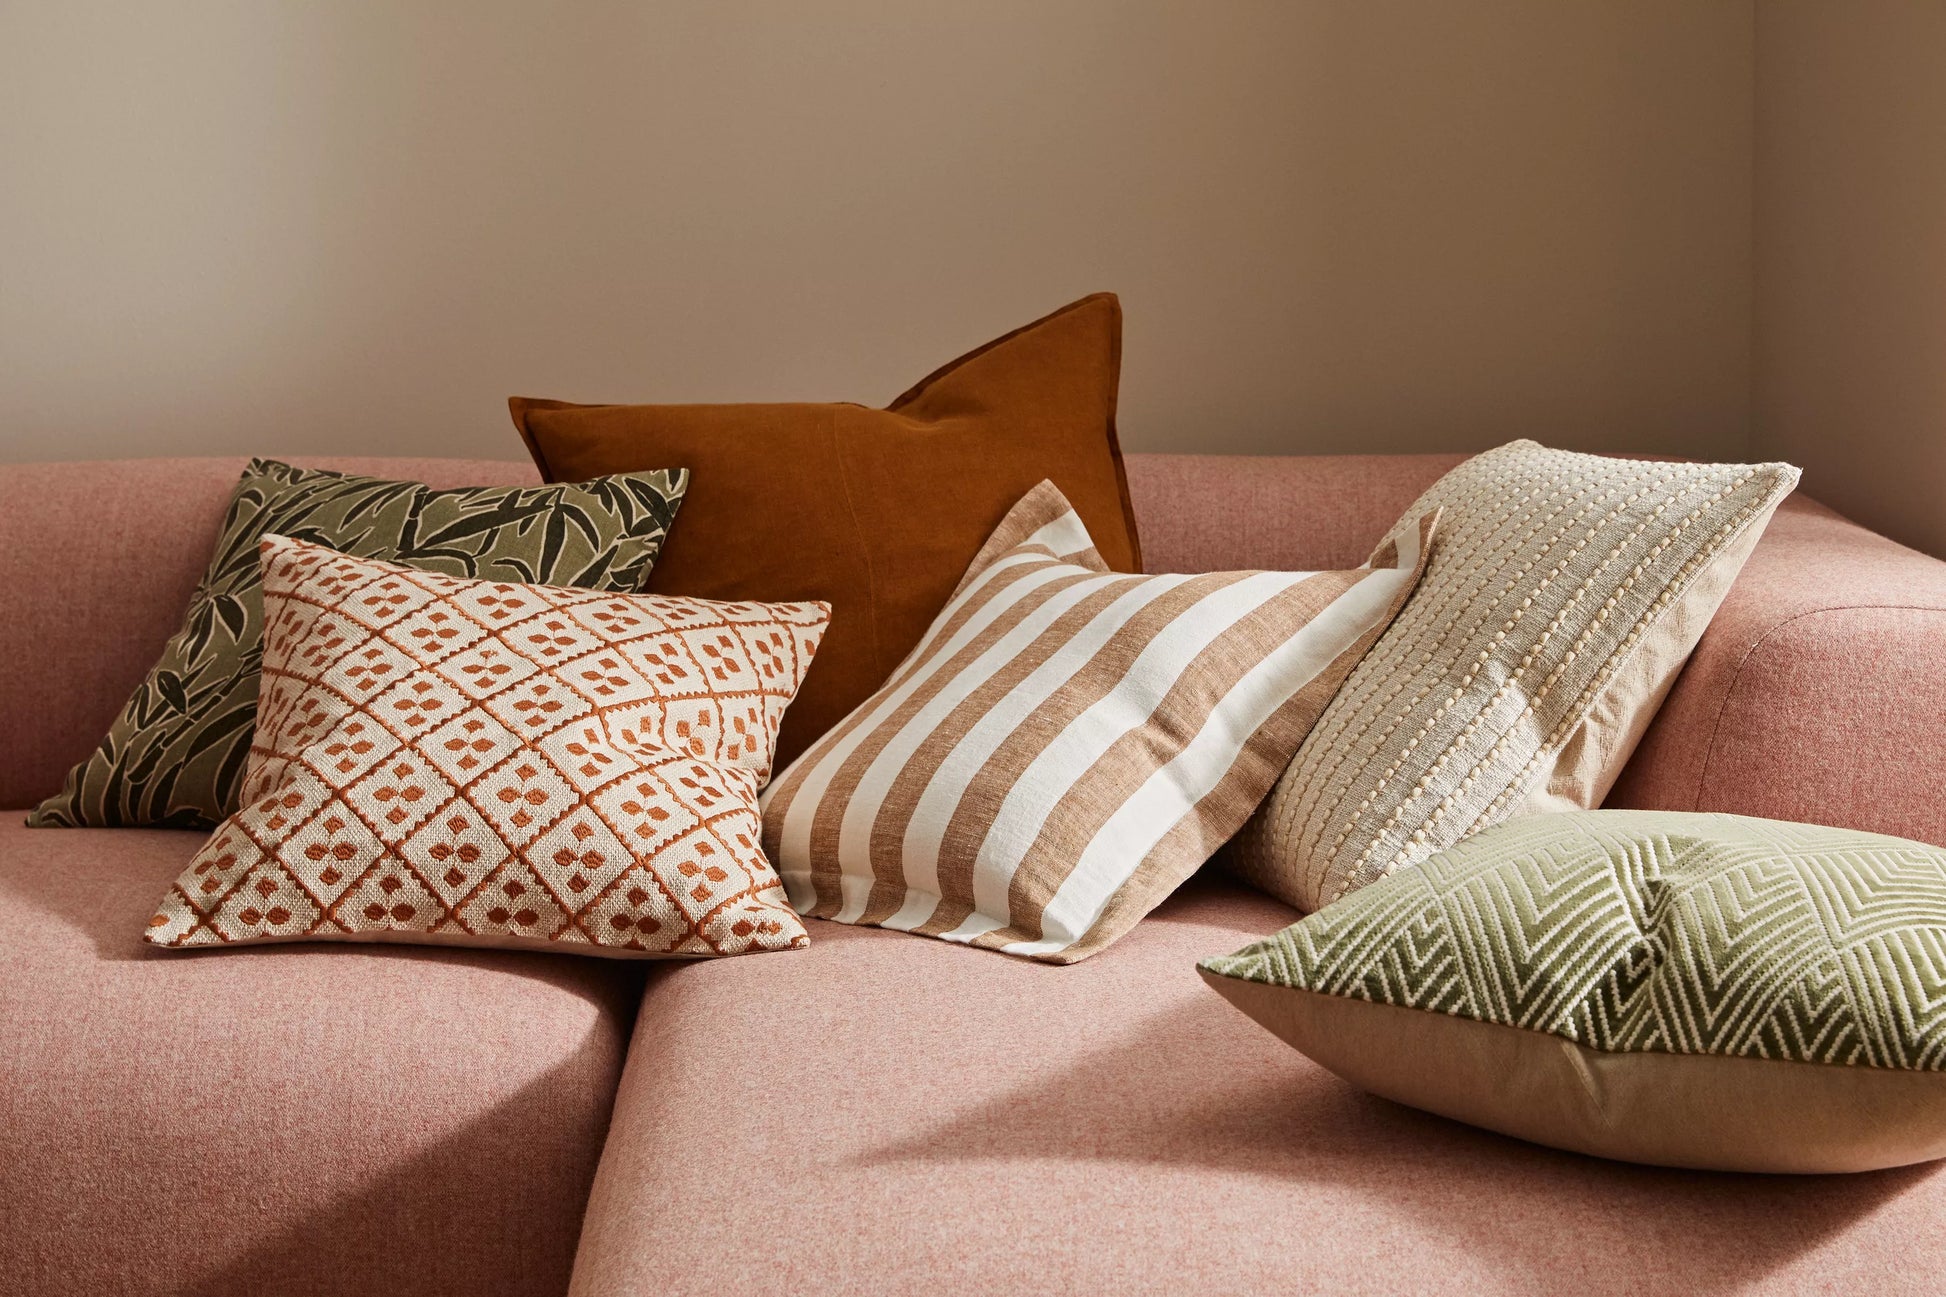 Byblos cushion from Weave Spice